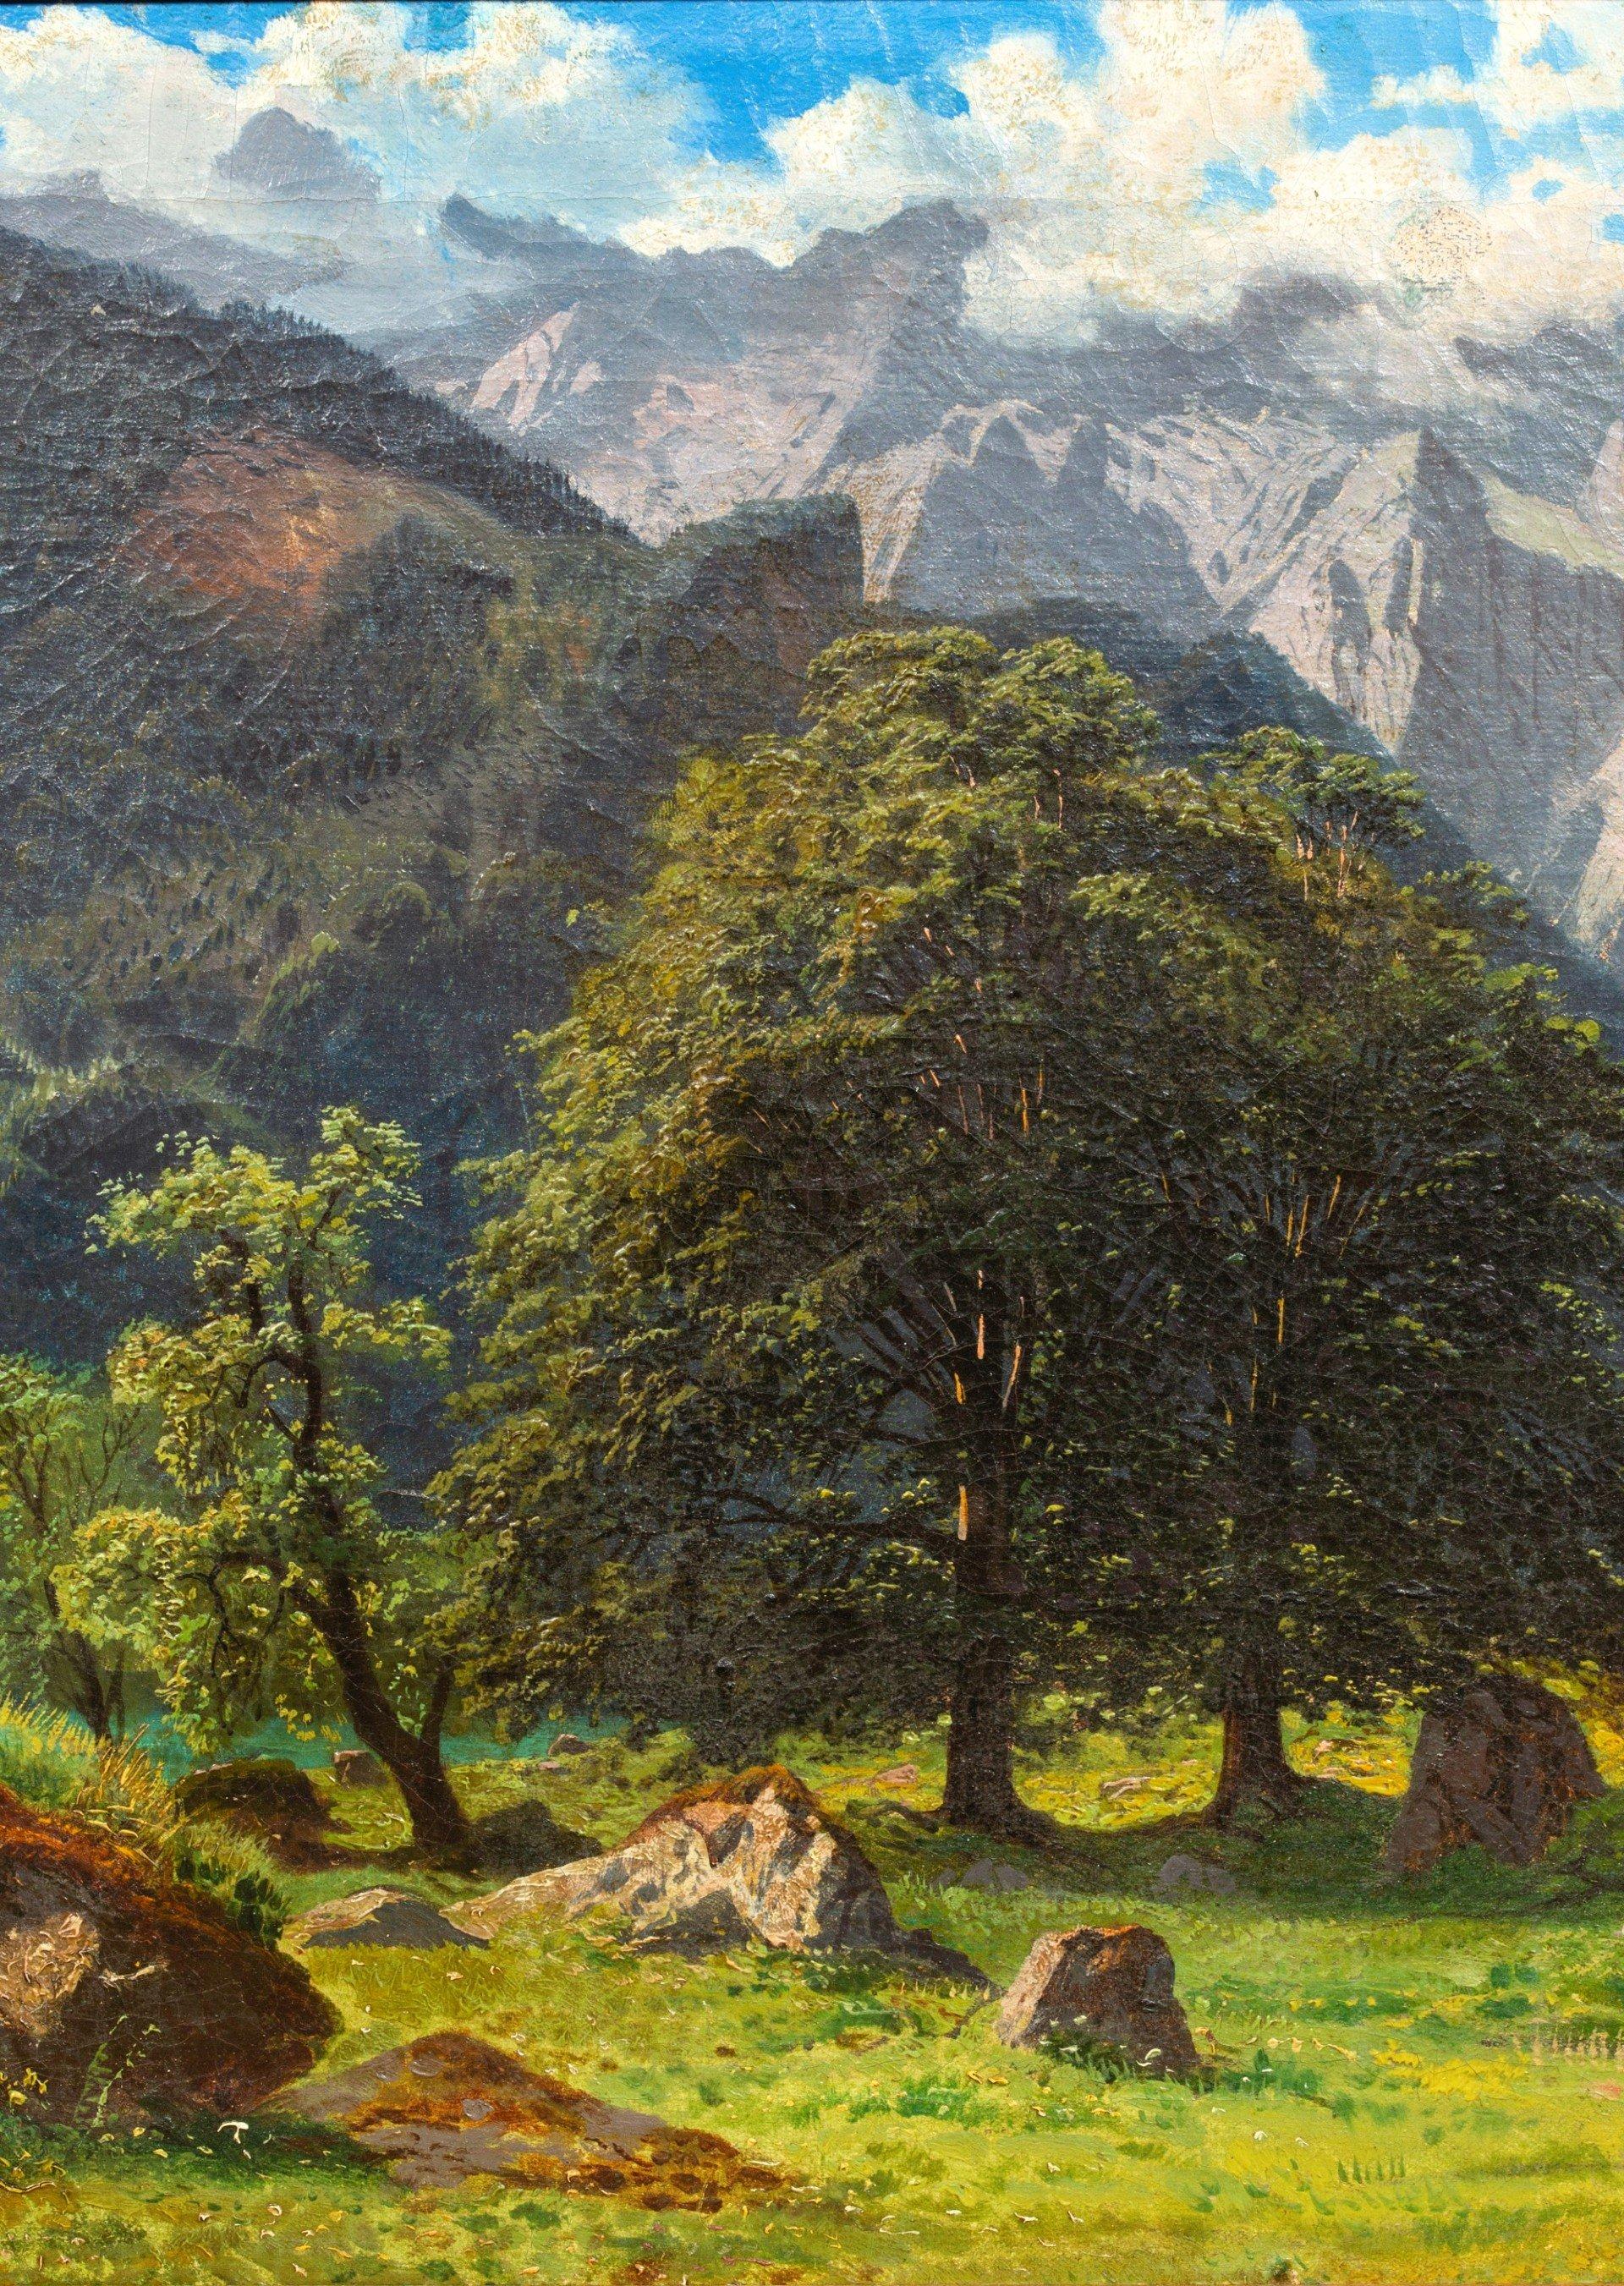 Obersee by François Roffiaen (1820-1898) Oil on canvas For Sale 6